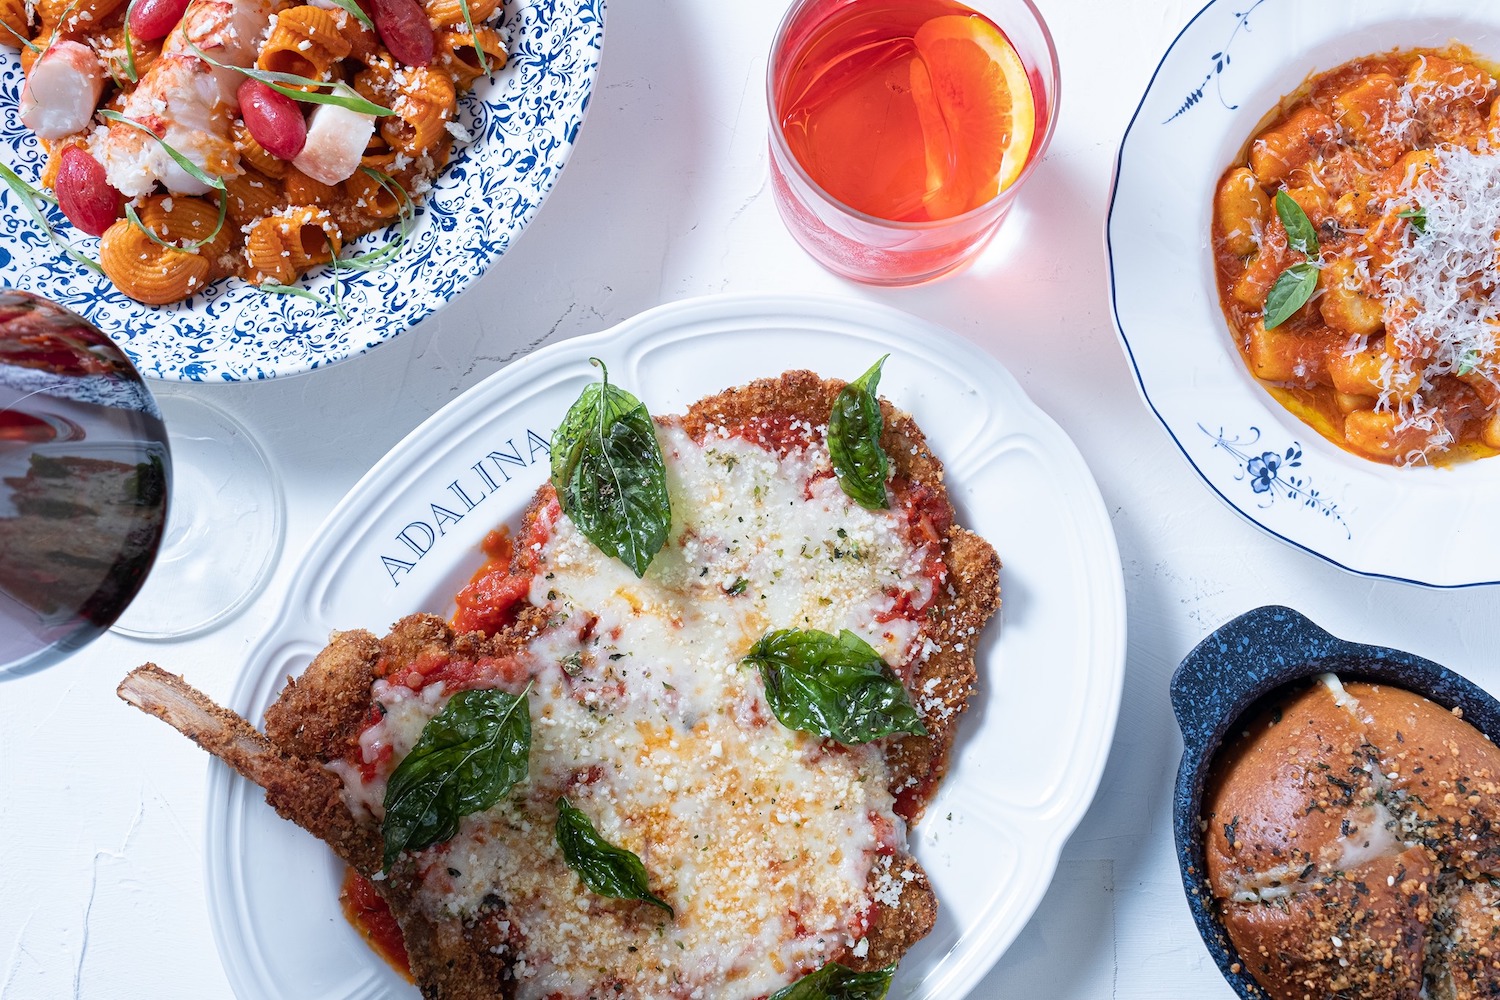 Spread of dishes and cocktails like pasta and chicken parm on a table